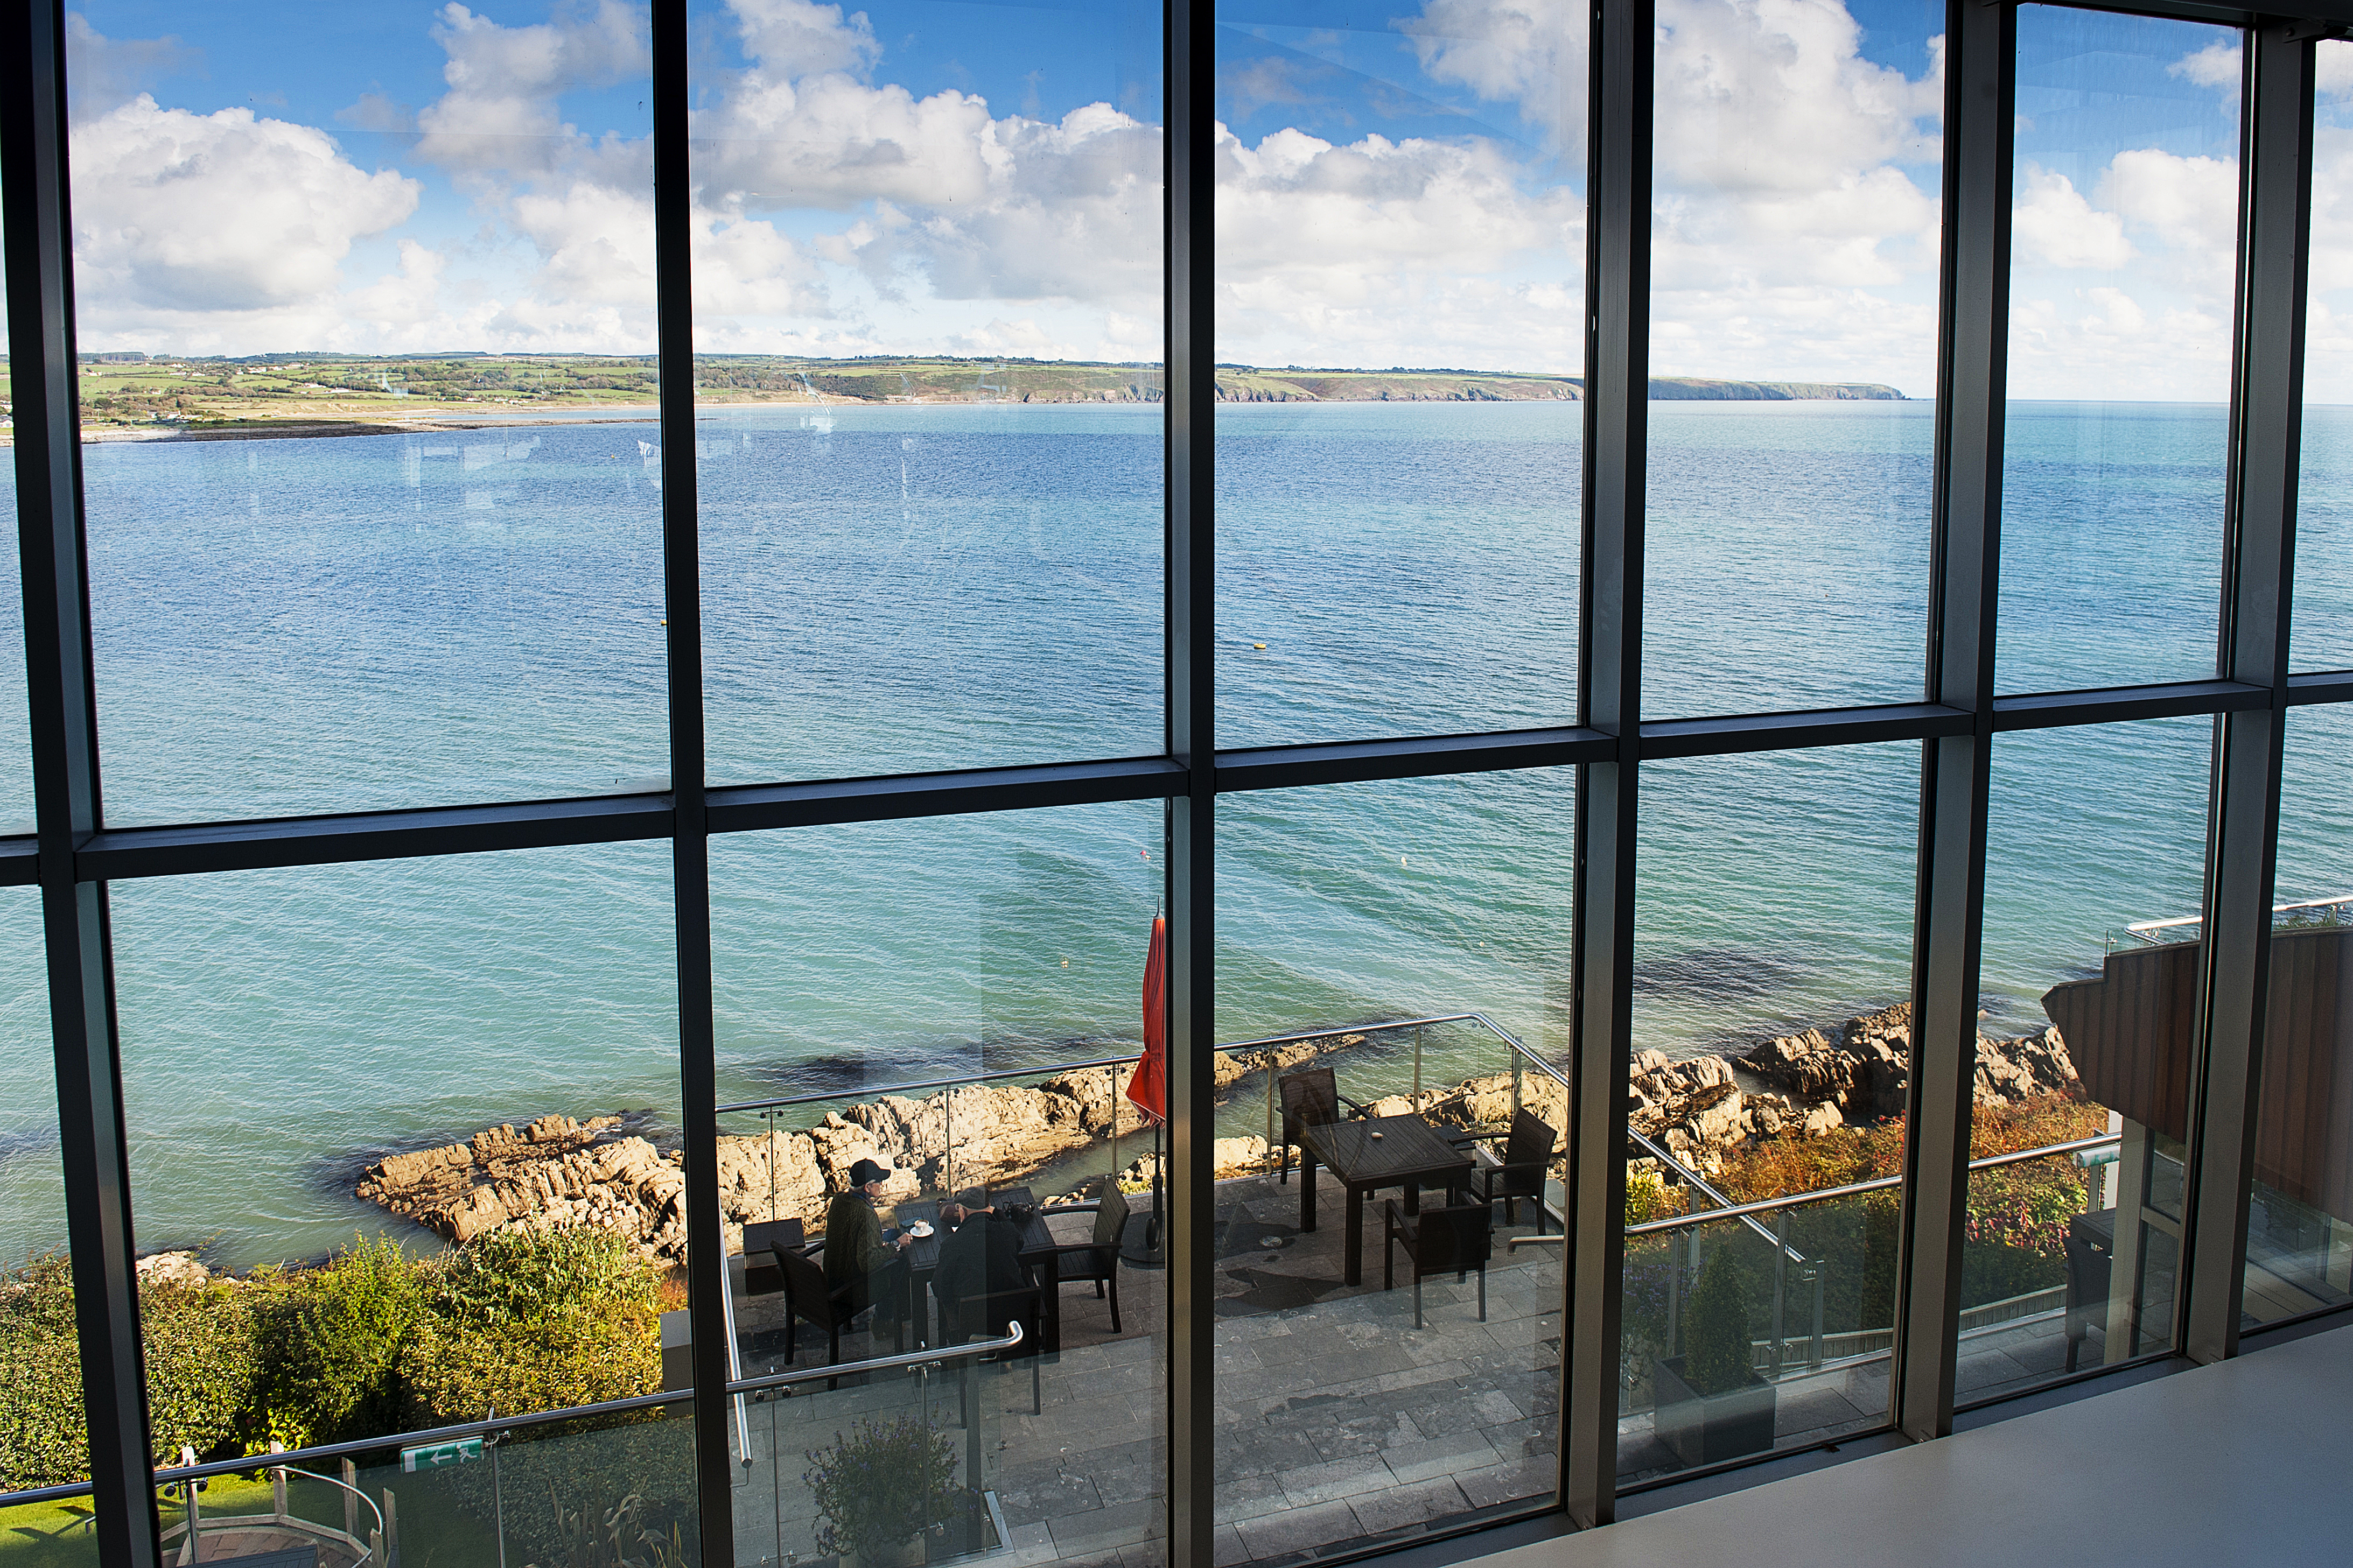 The Cliff House Hotel, Ardmore, County Waterford